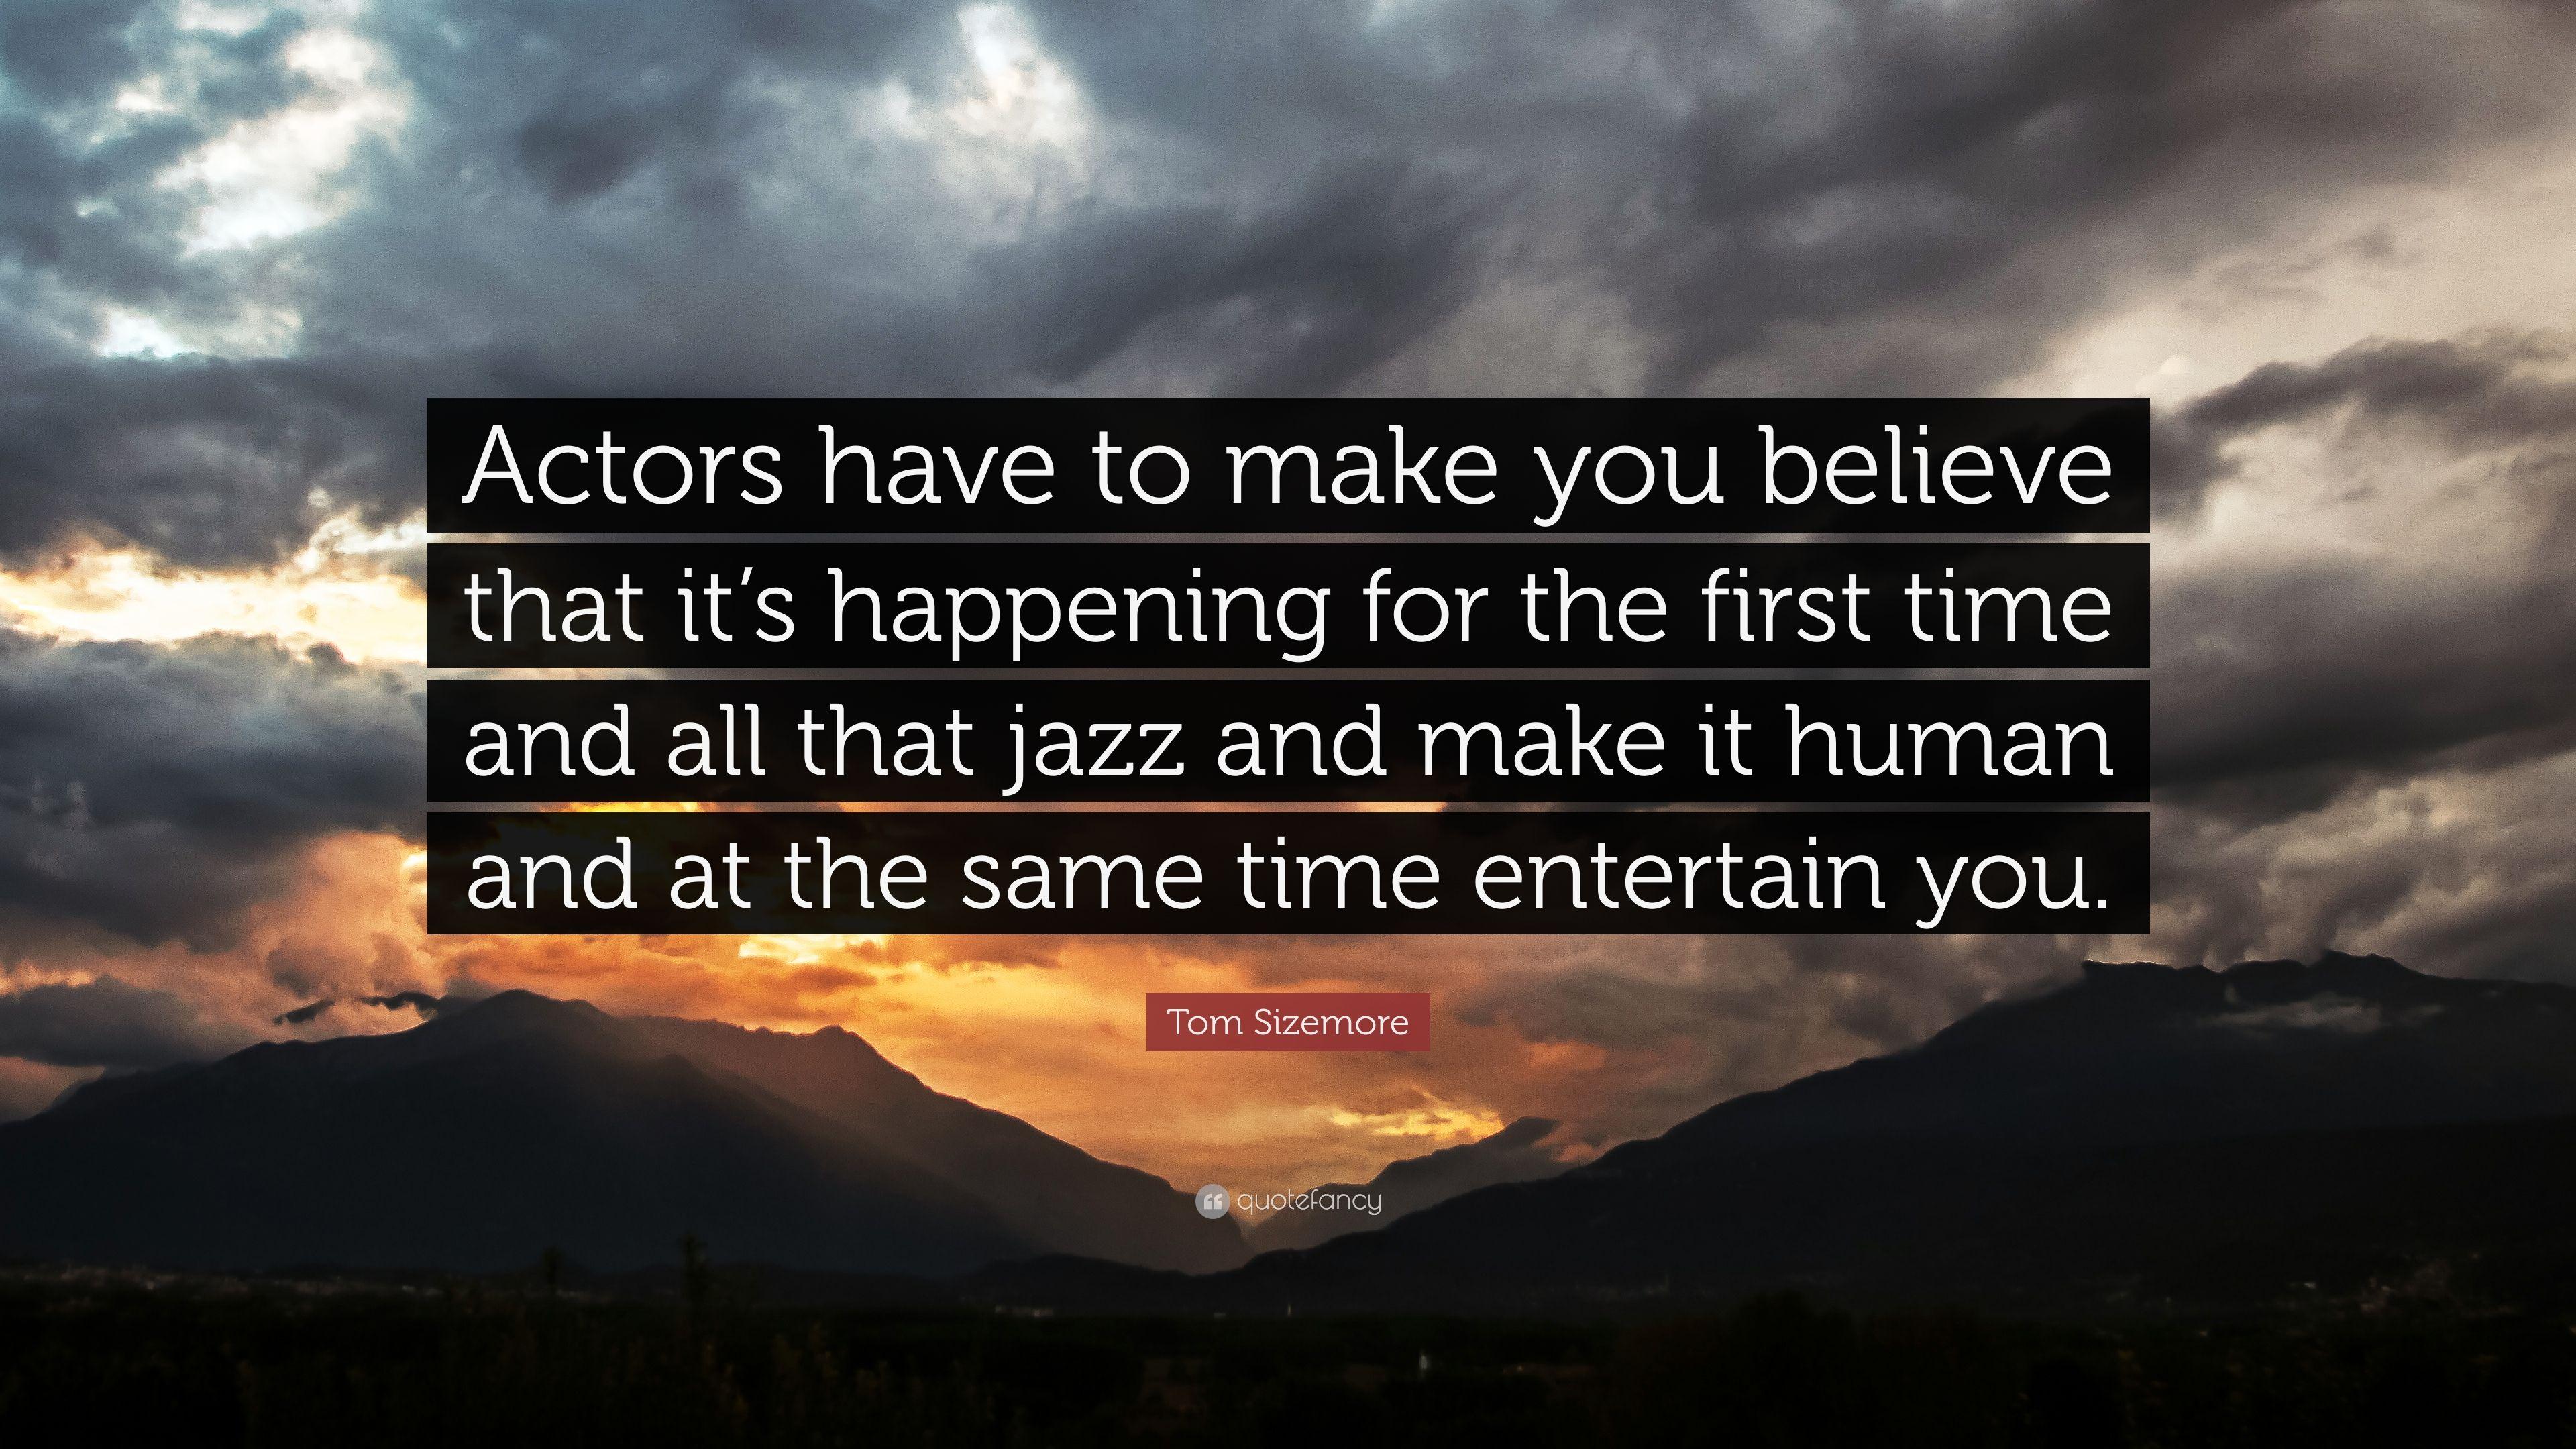 Tom Sizemore Quote: “Actors have to make you believe that it's